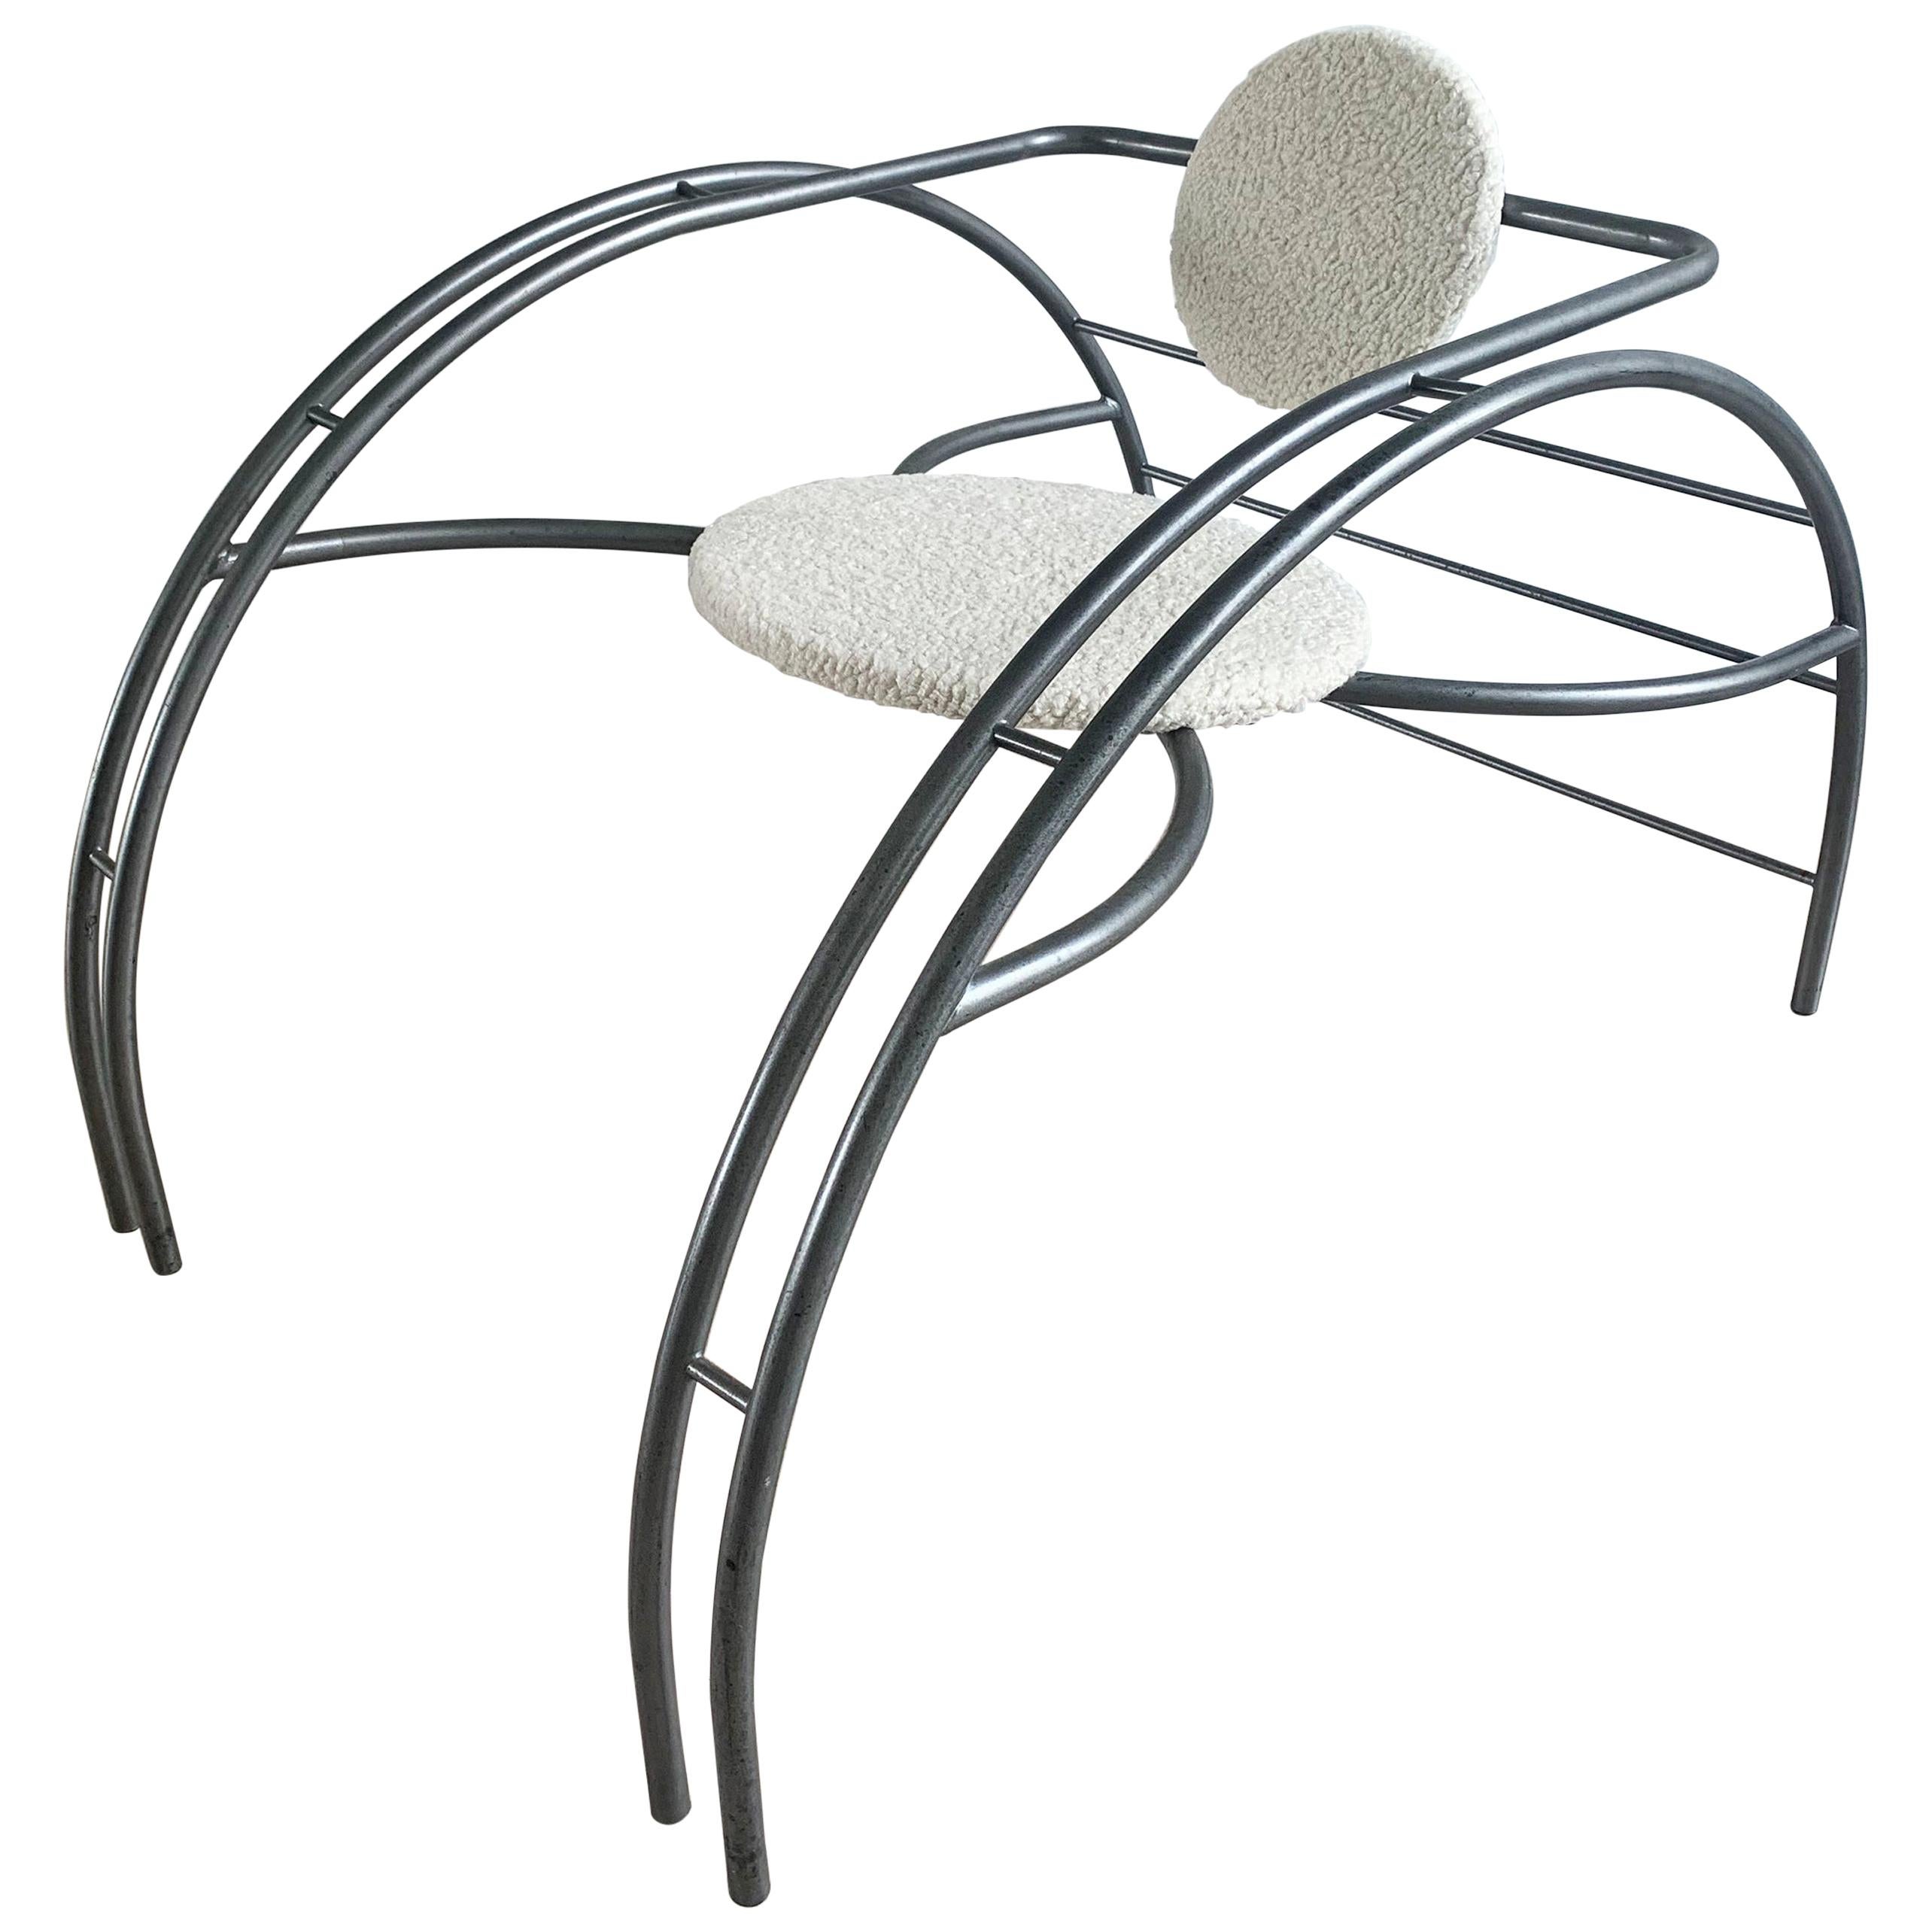 Postmodern Les Amisca Quebec 69 Spider Chair